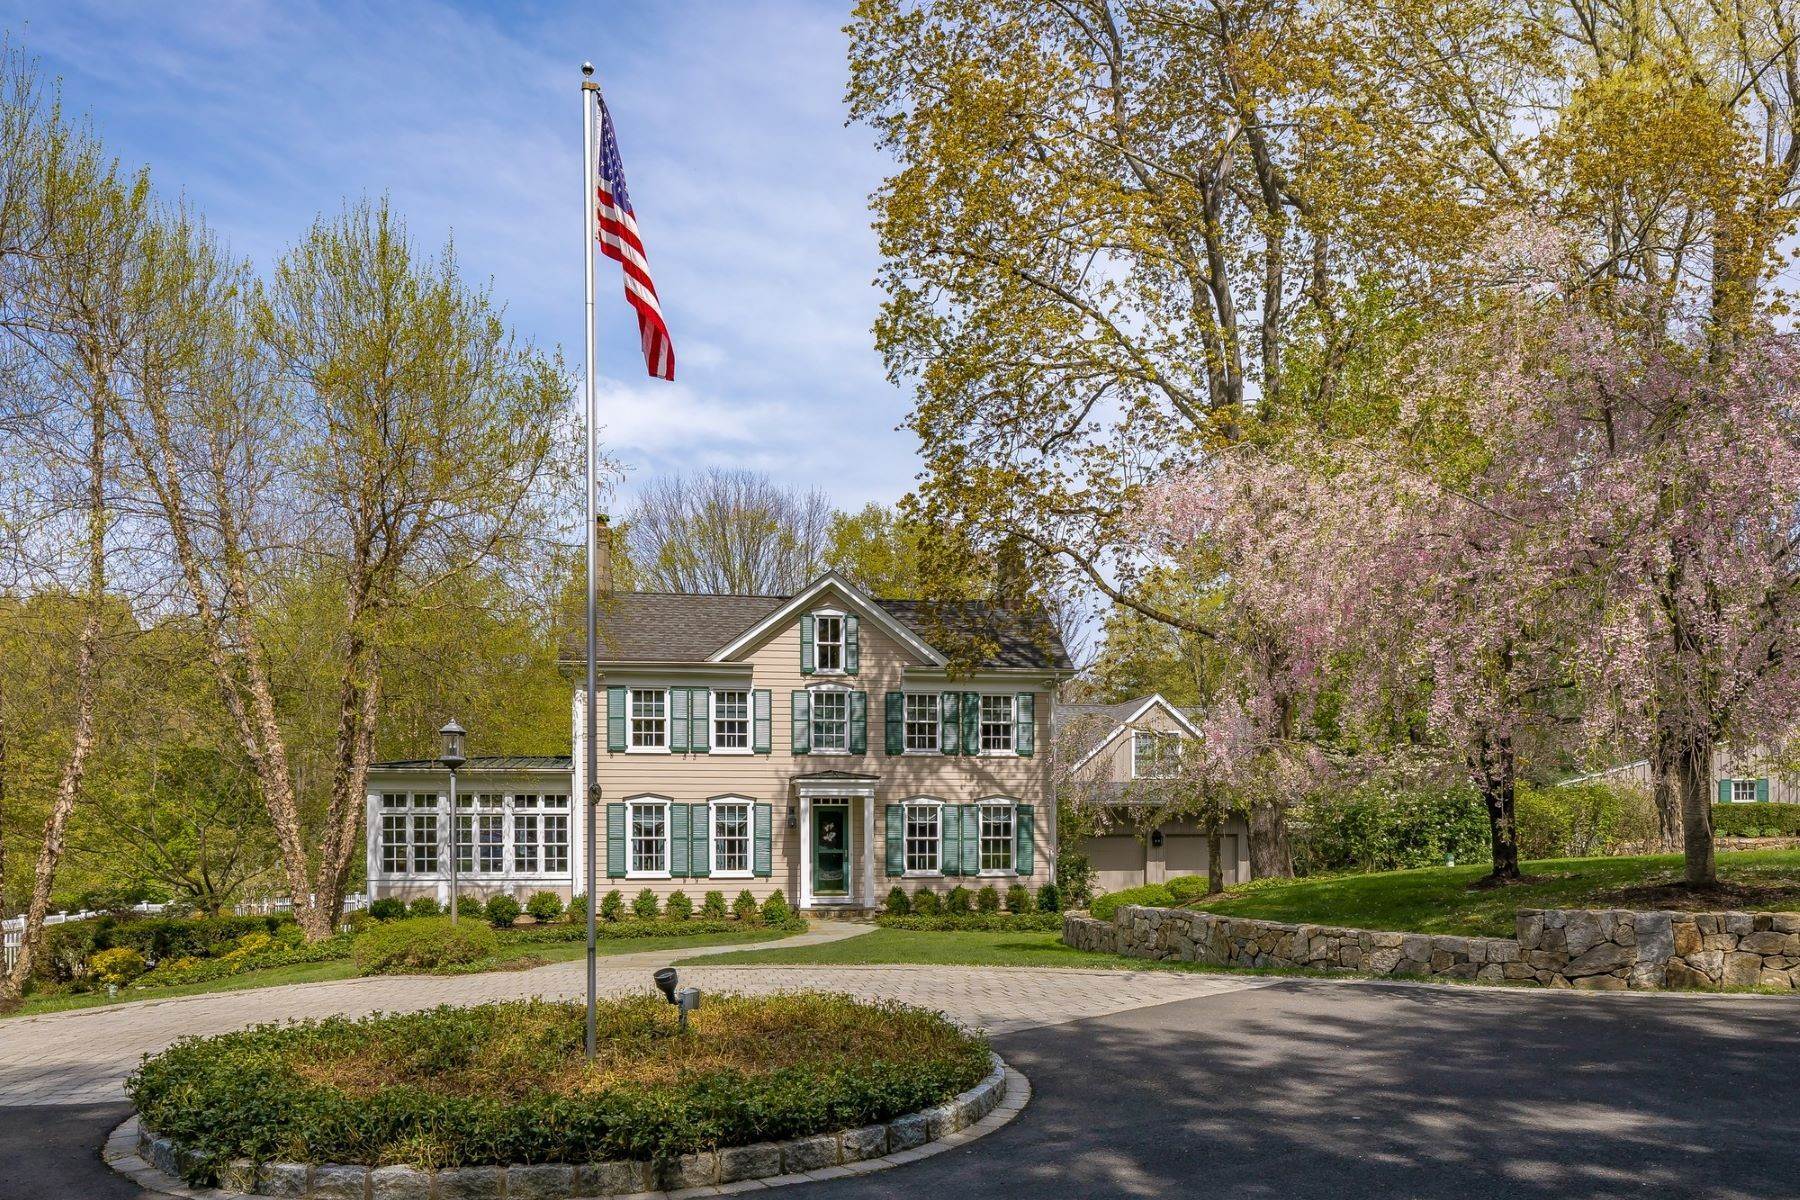 Single Family Homes for Sale at Leaning Oak Pond 351 Hilltop Road Mendham, New Jersey 07945 United States